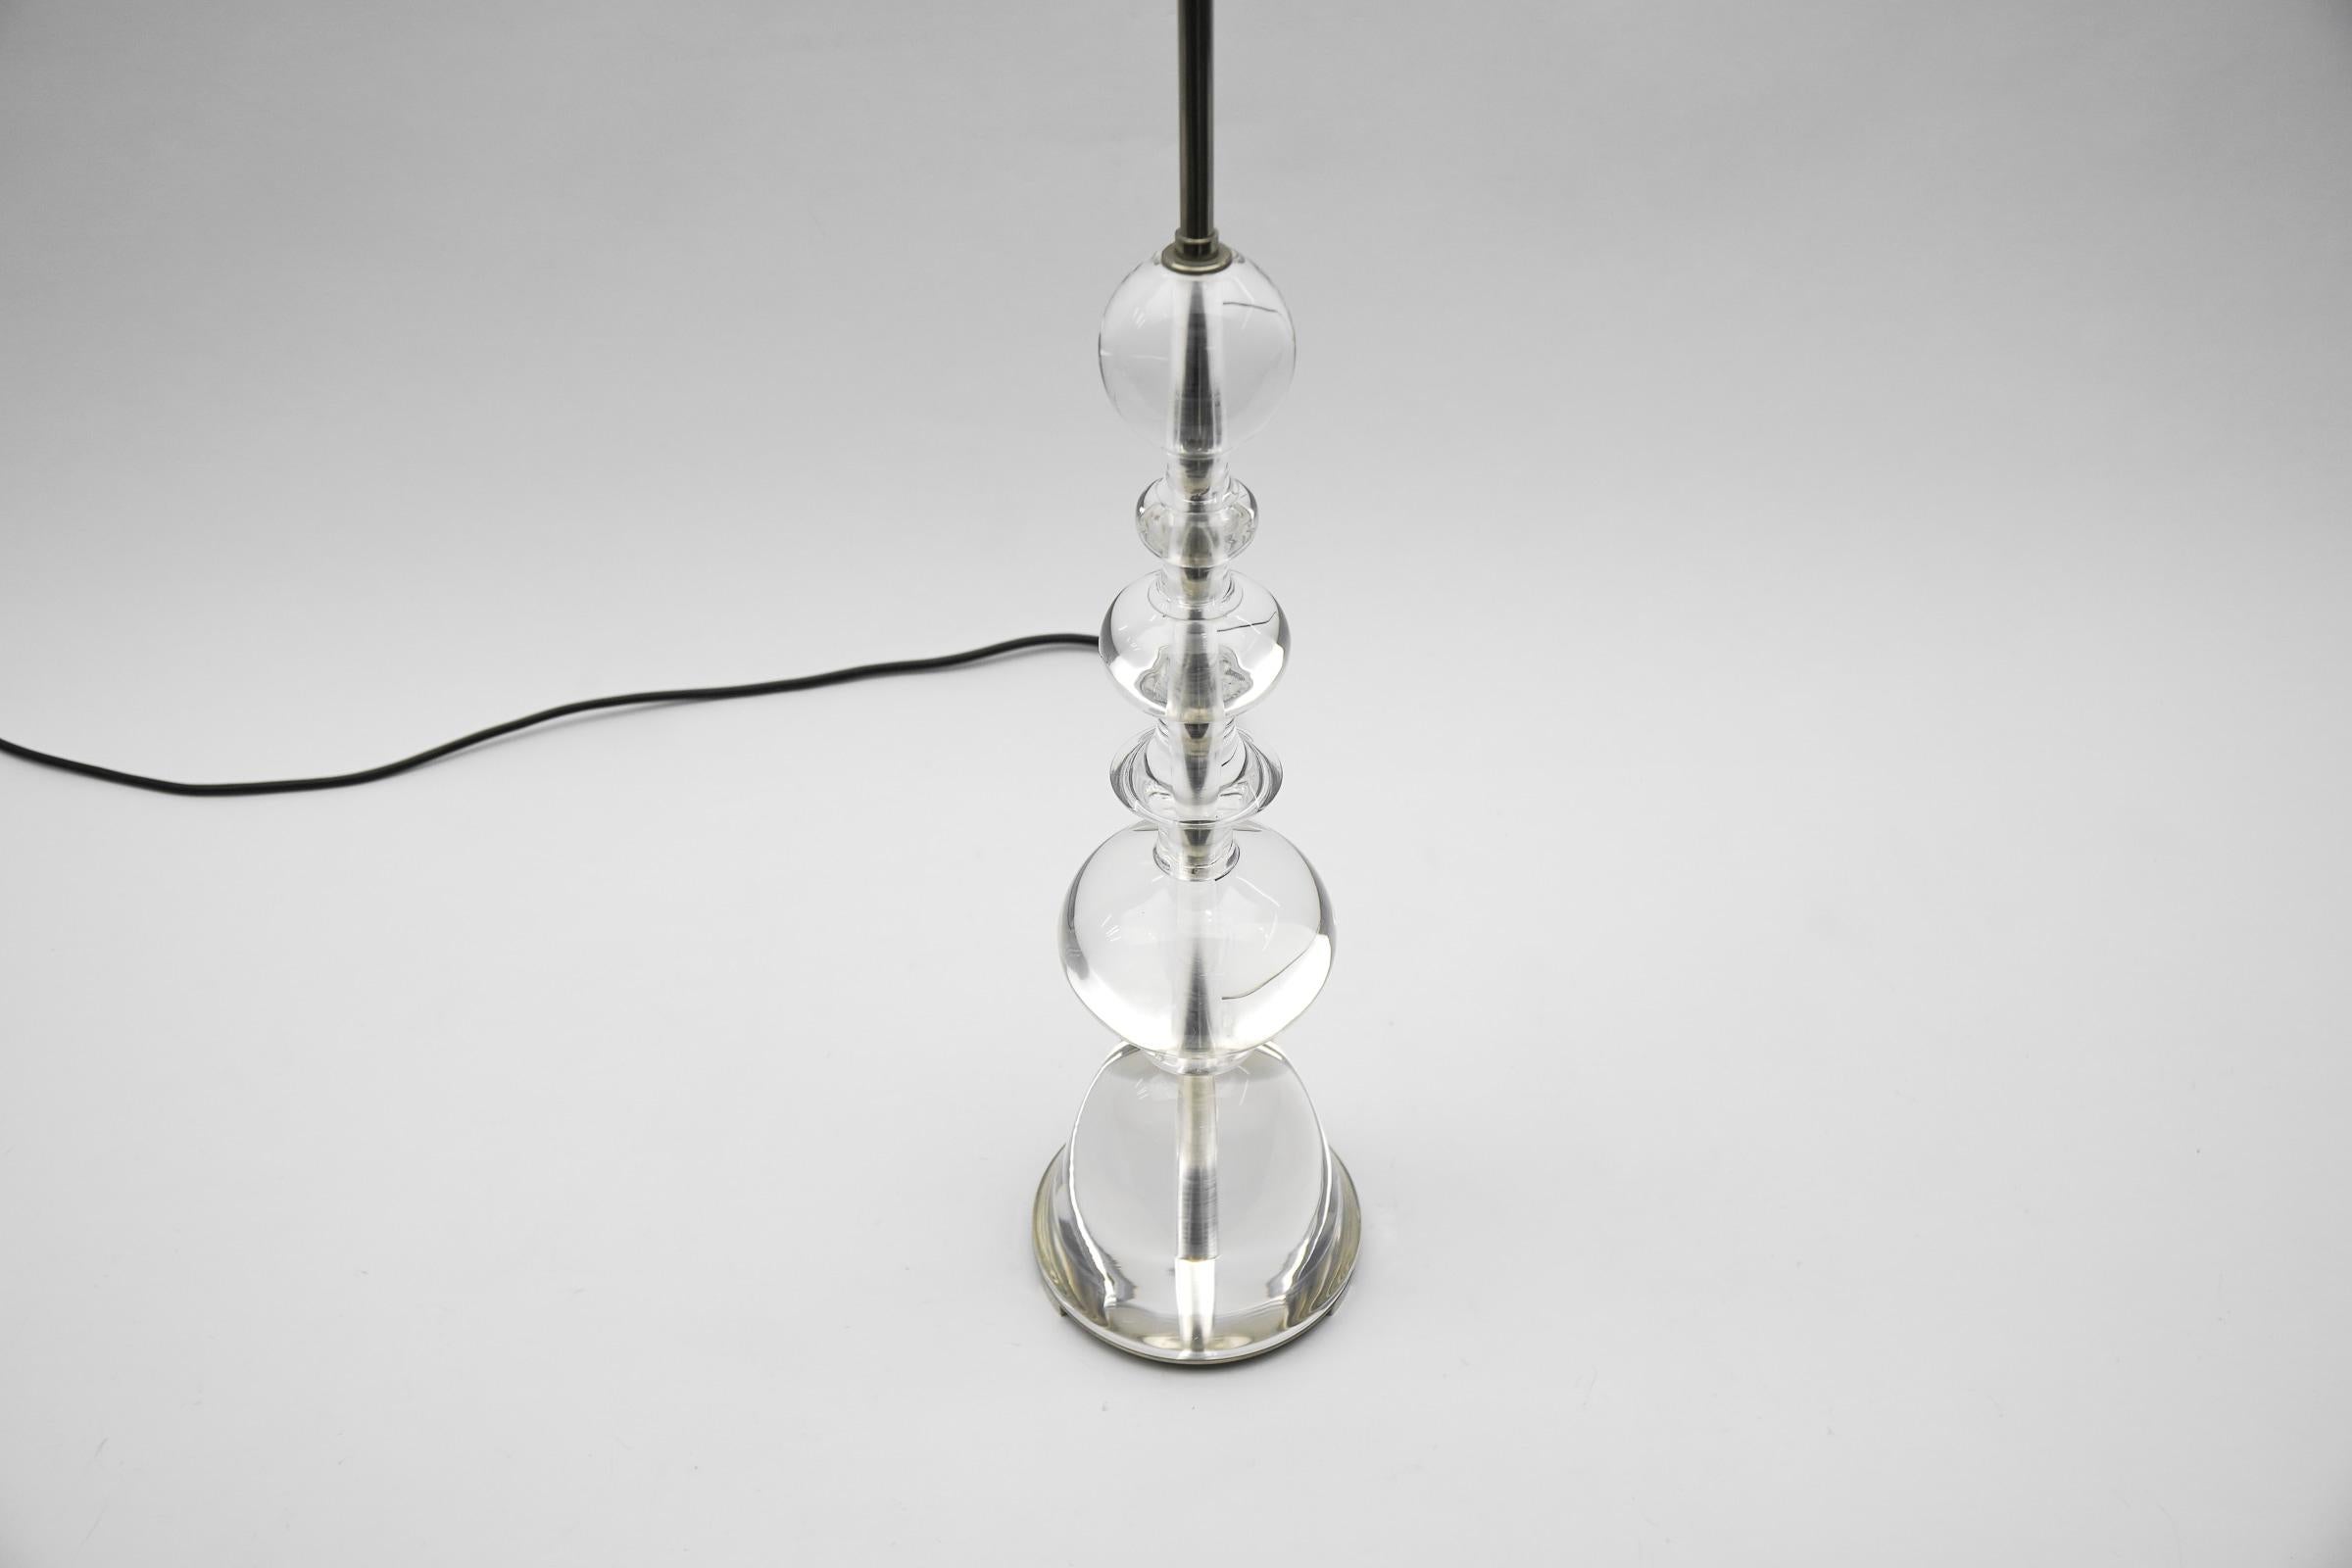 Ingo Maurer Acrylic Table Lamp ML 9 T M-Design, 1960s Germany For Sale 3